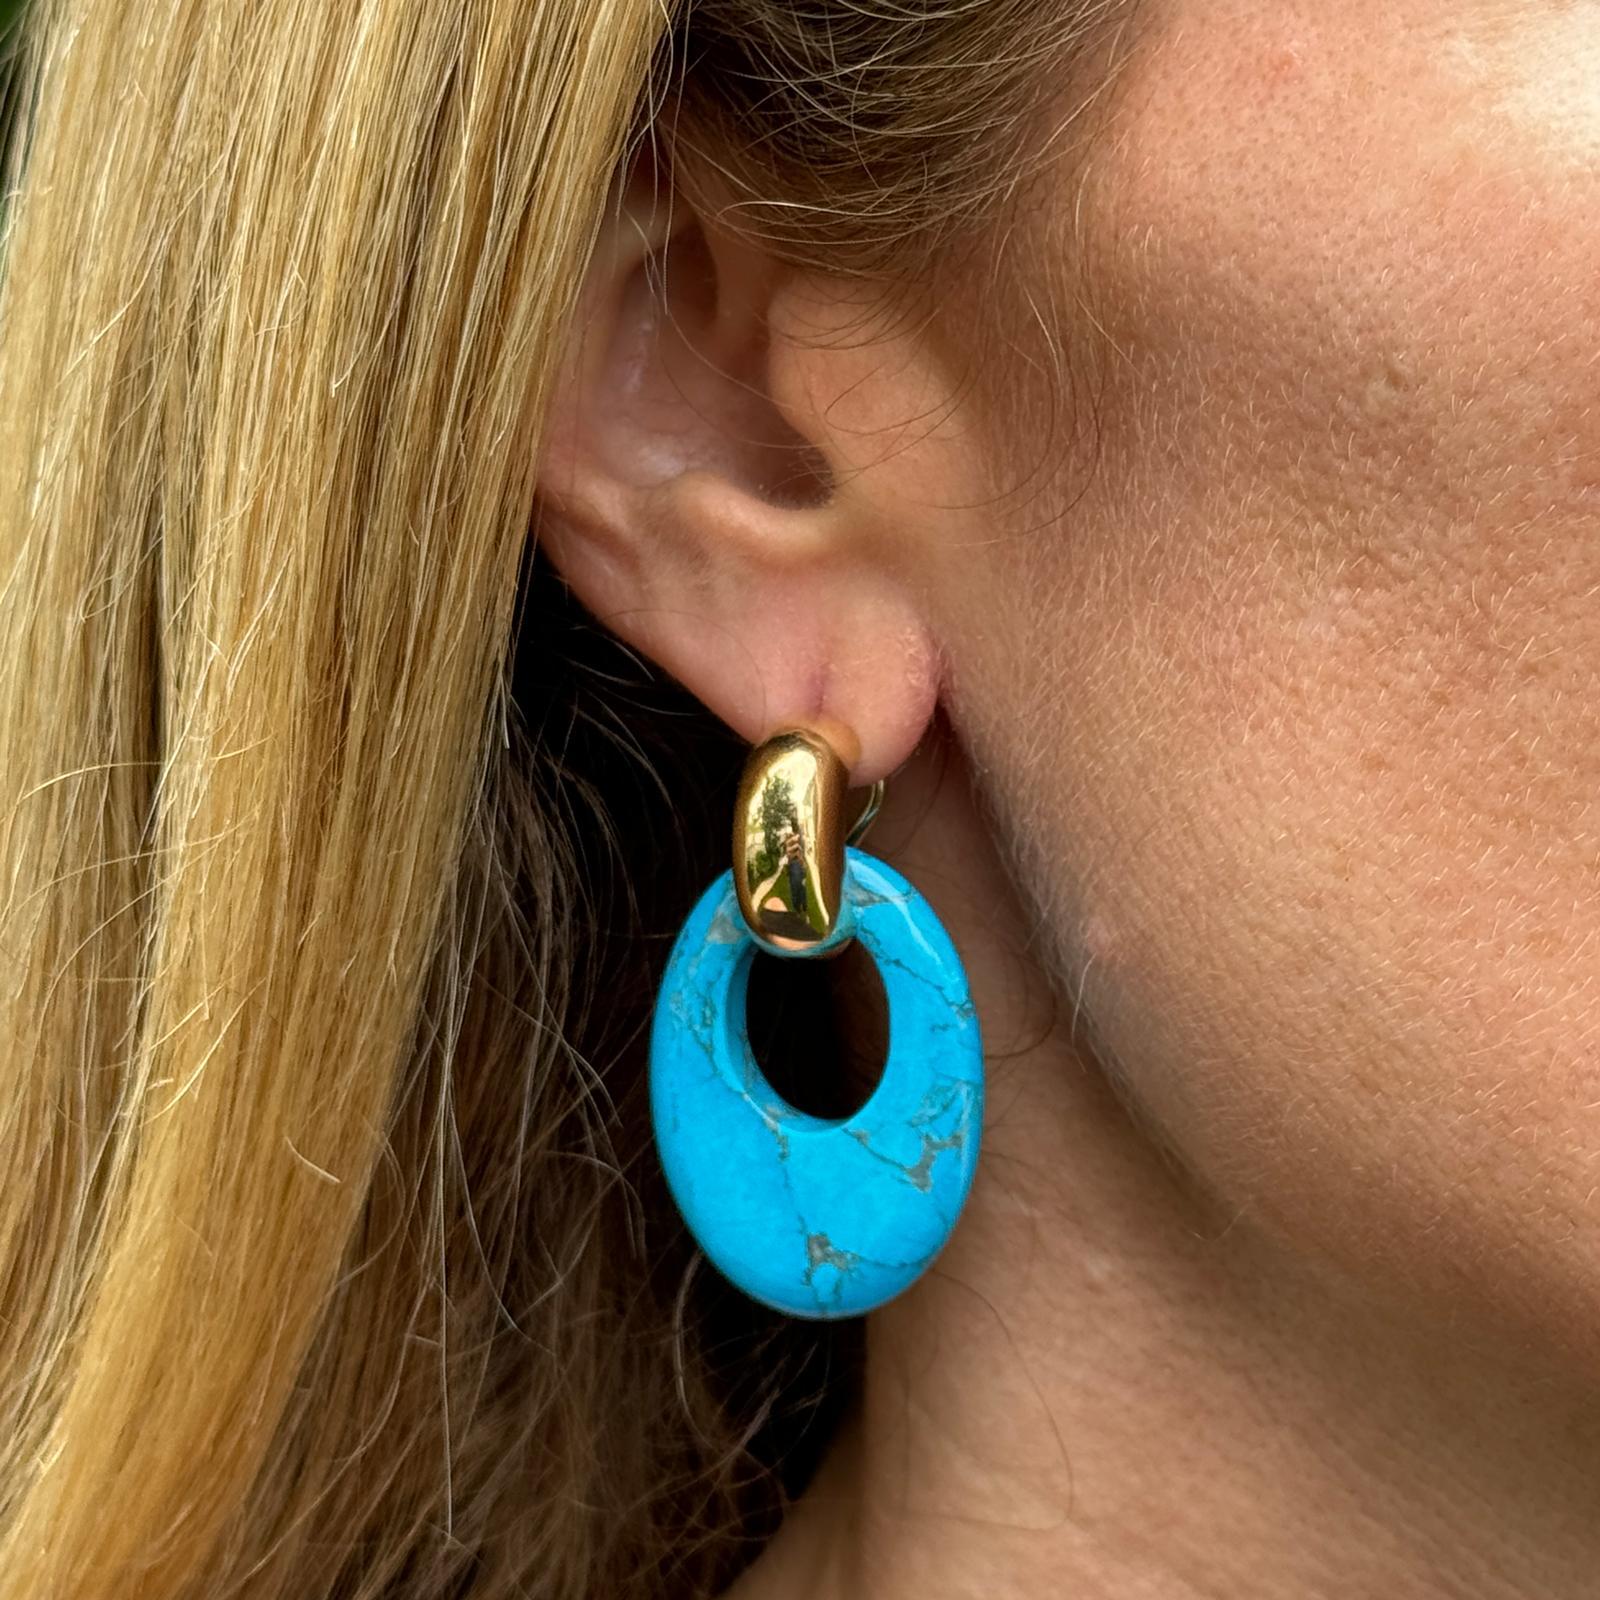 Interchangeable turquoise, onyx, and tiger's eye gemstone drop door knocker earrings crafted in 14 karat yellow gold. The yellow gold huggie hoops can be worn alone or with the gemstone drops. The earrings measure 1.50 inches in length with